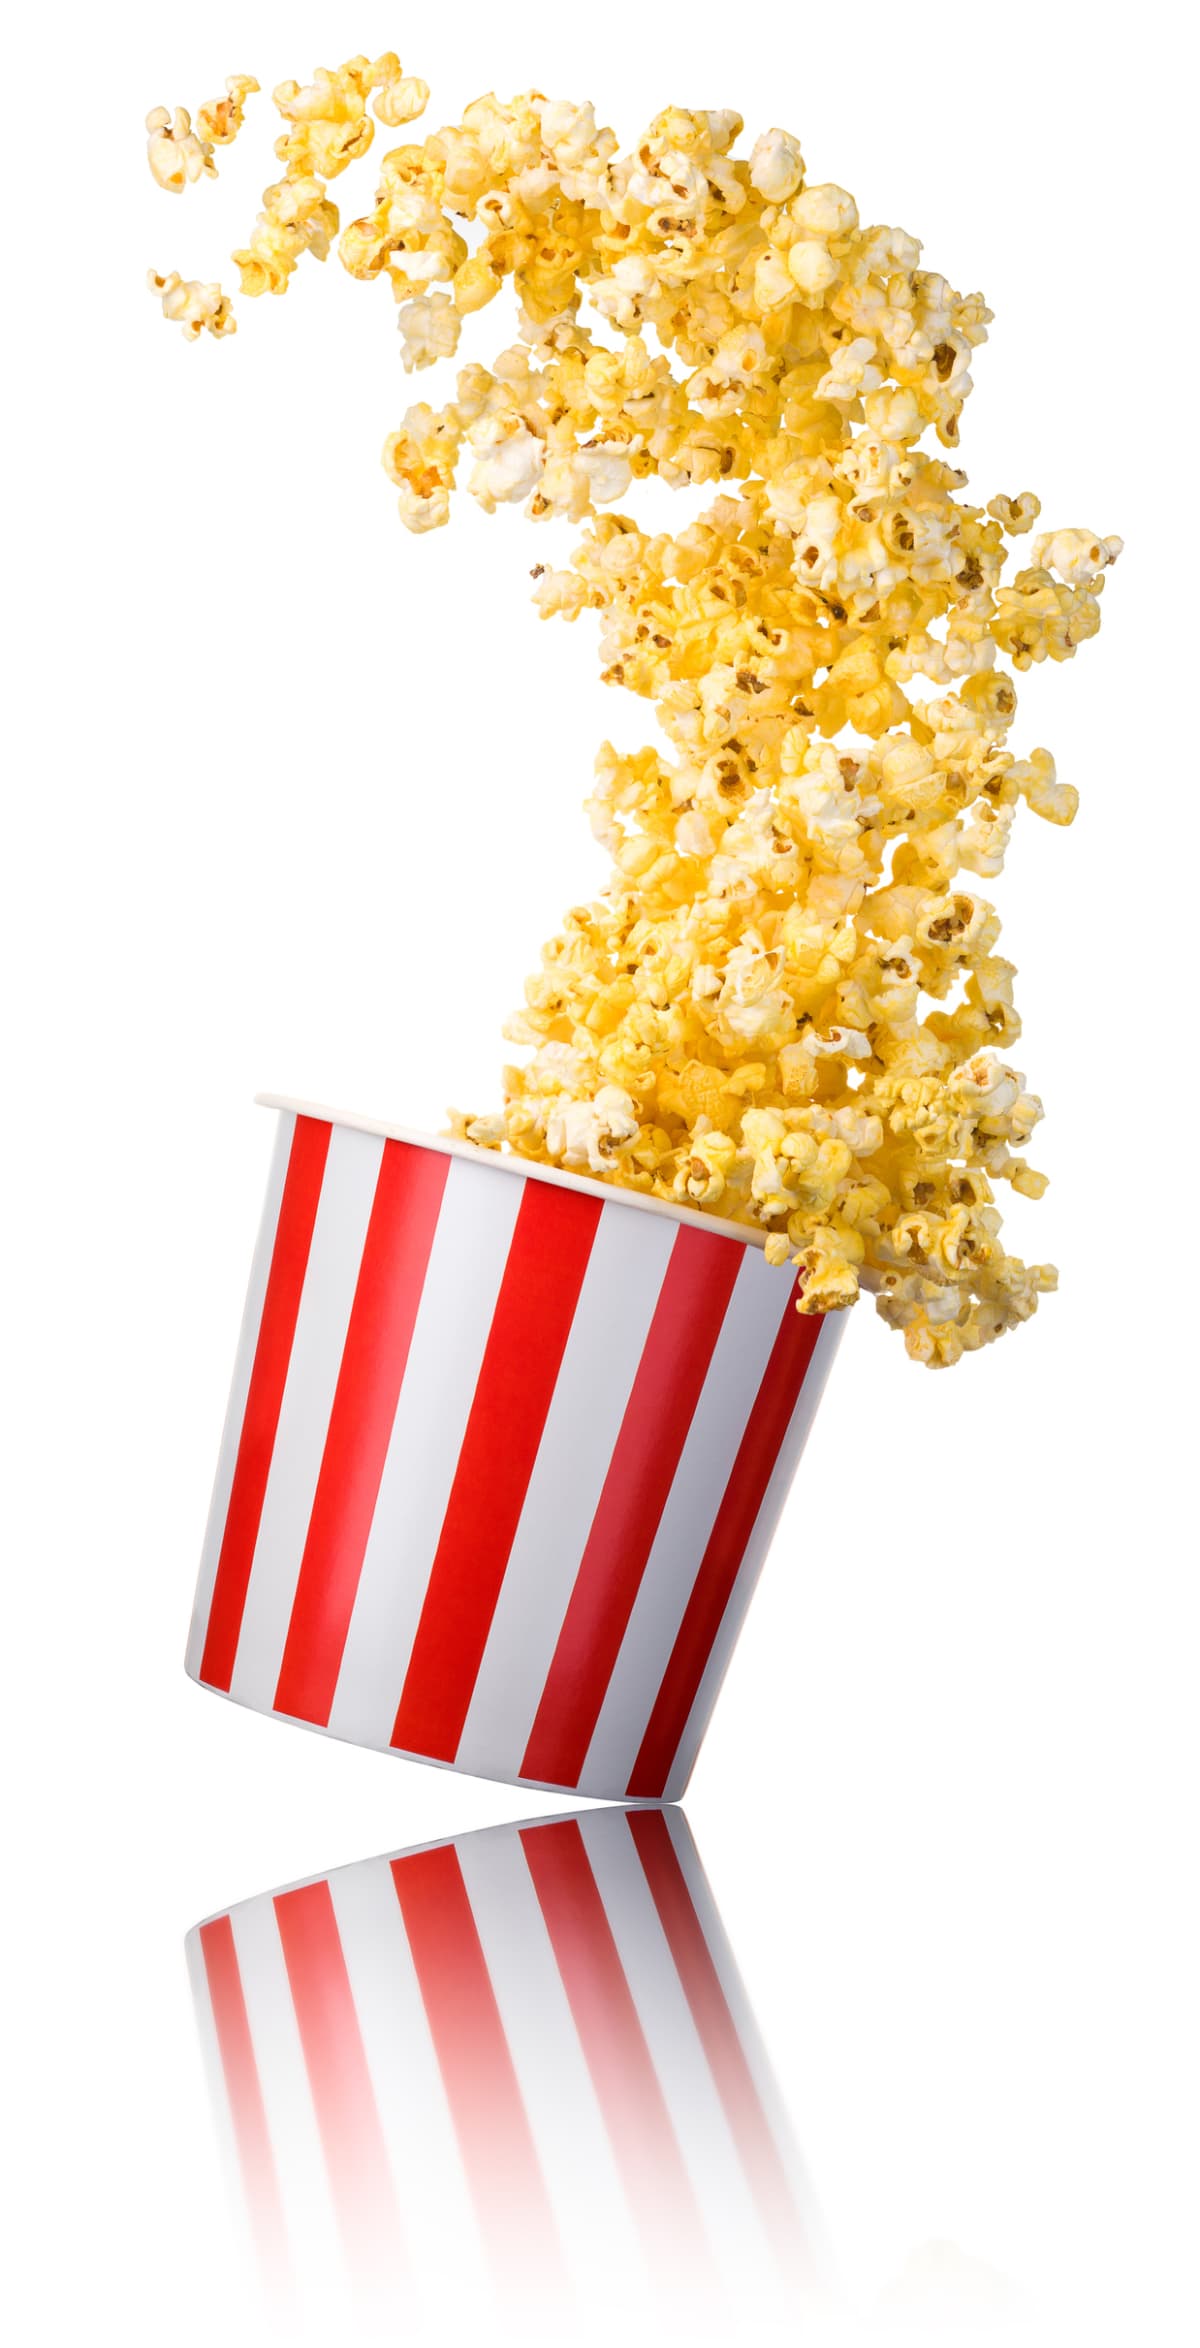 Overhead image of white popcorn box with popcorn spilling out photographed on white background with  cast shadow.